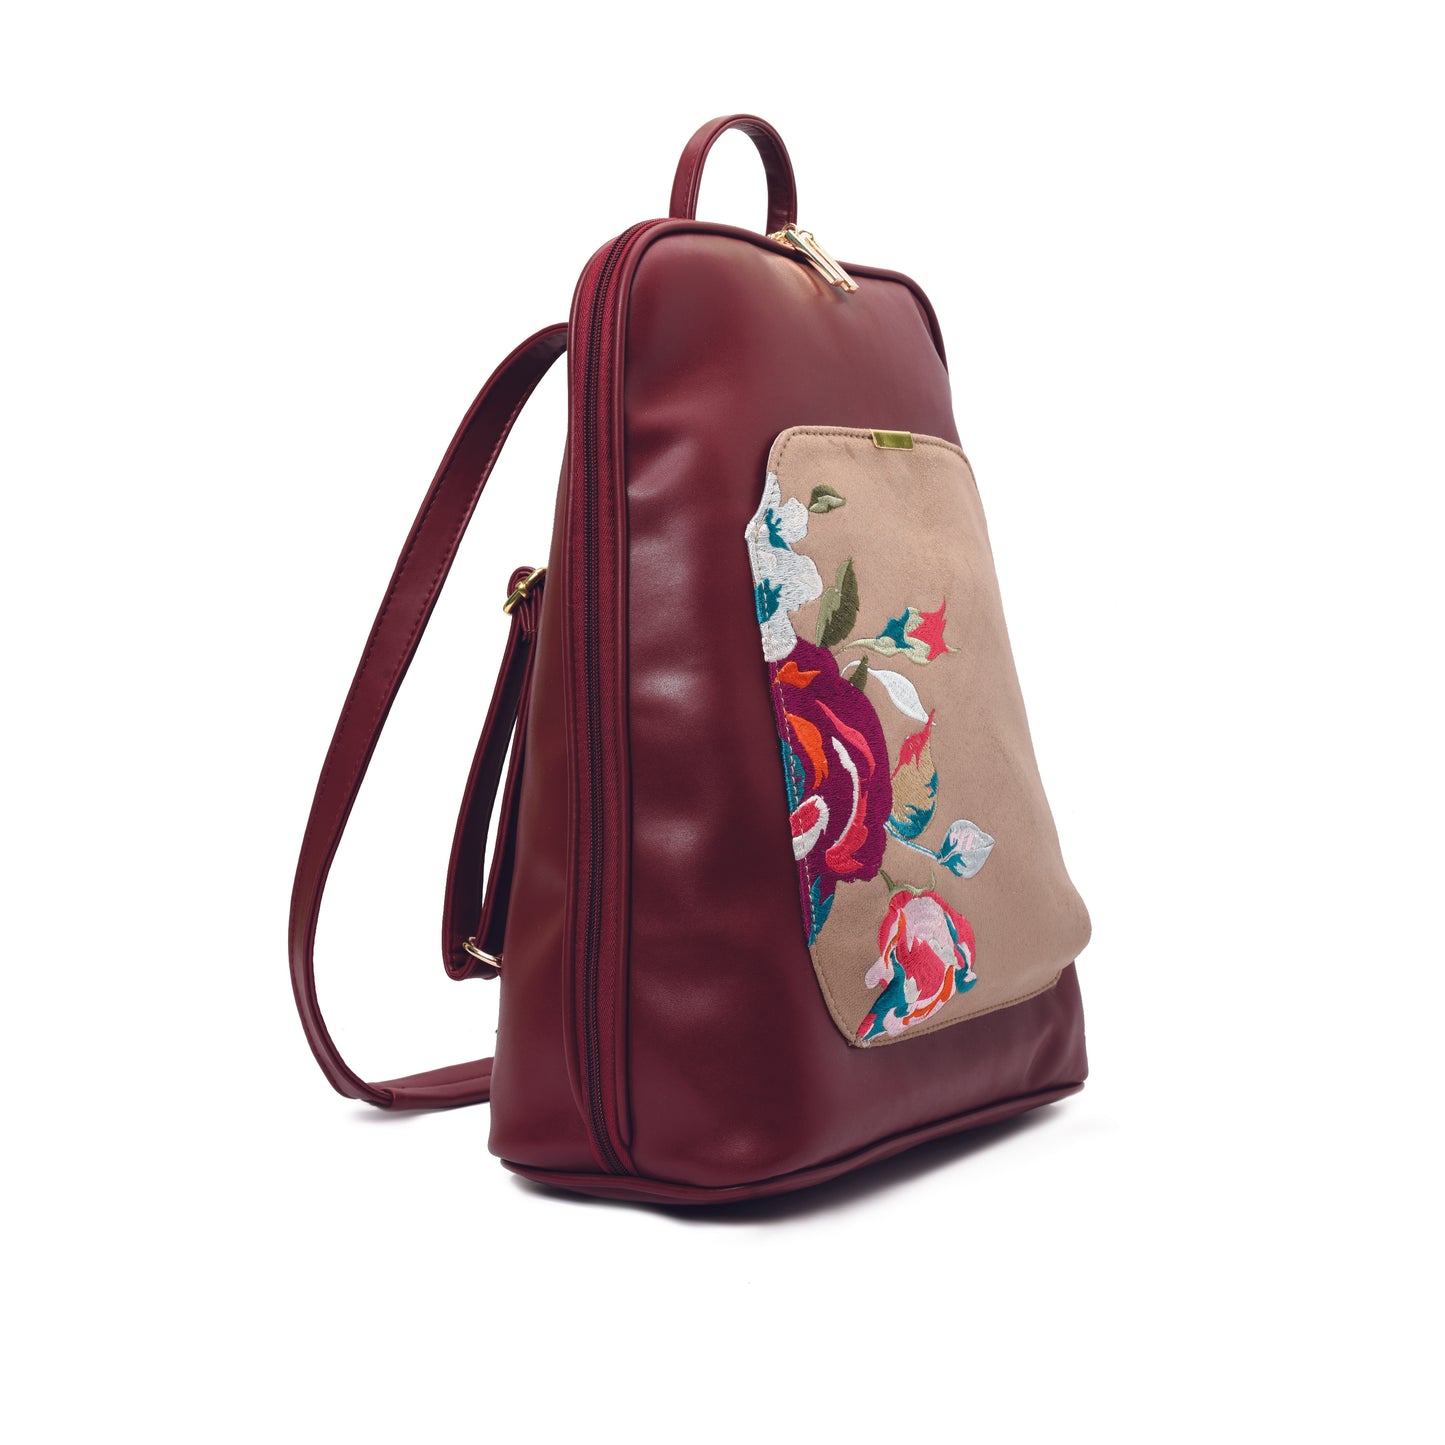 Laptop Burgundy with Beige embroideries fabric Backpack/Cross